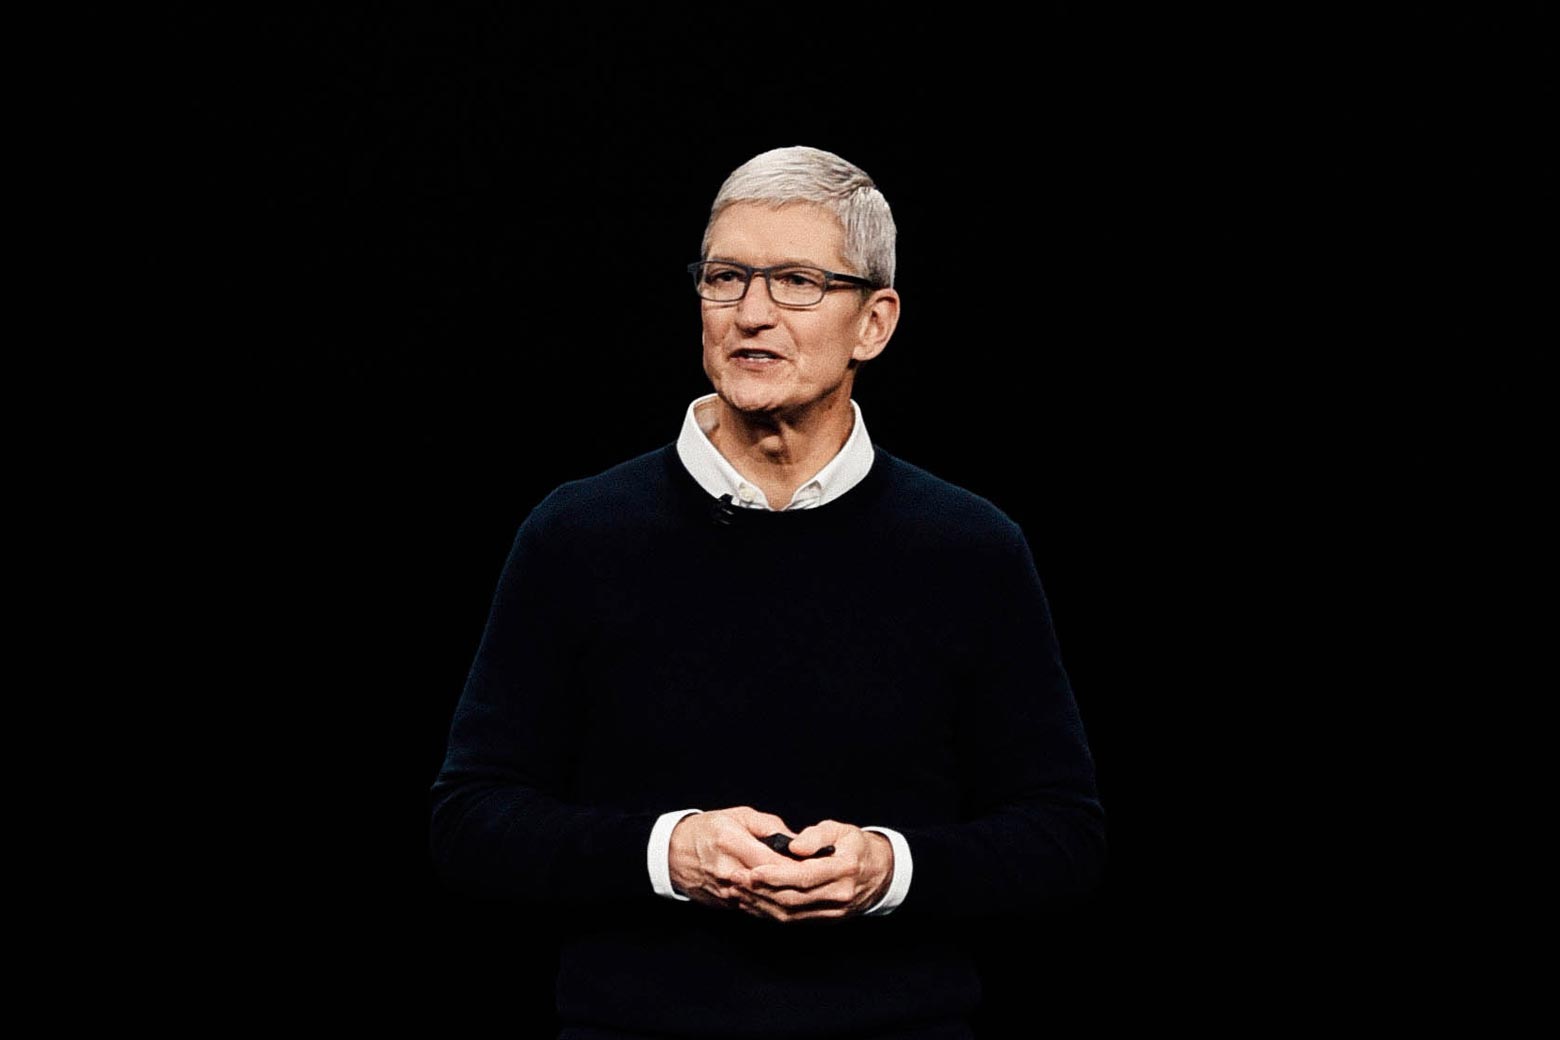 Apple Inc. CEO Tim Cook speaks during a company product launch event on Monday in Cupertino, California.